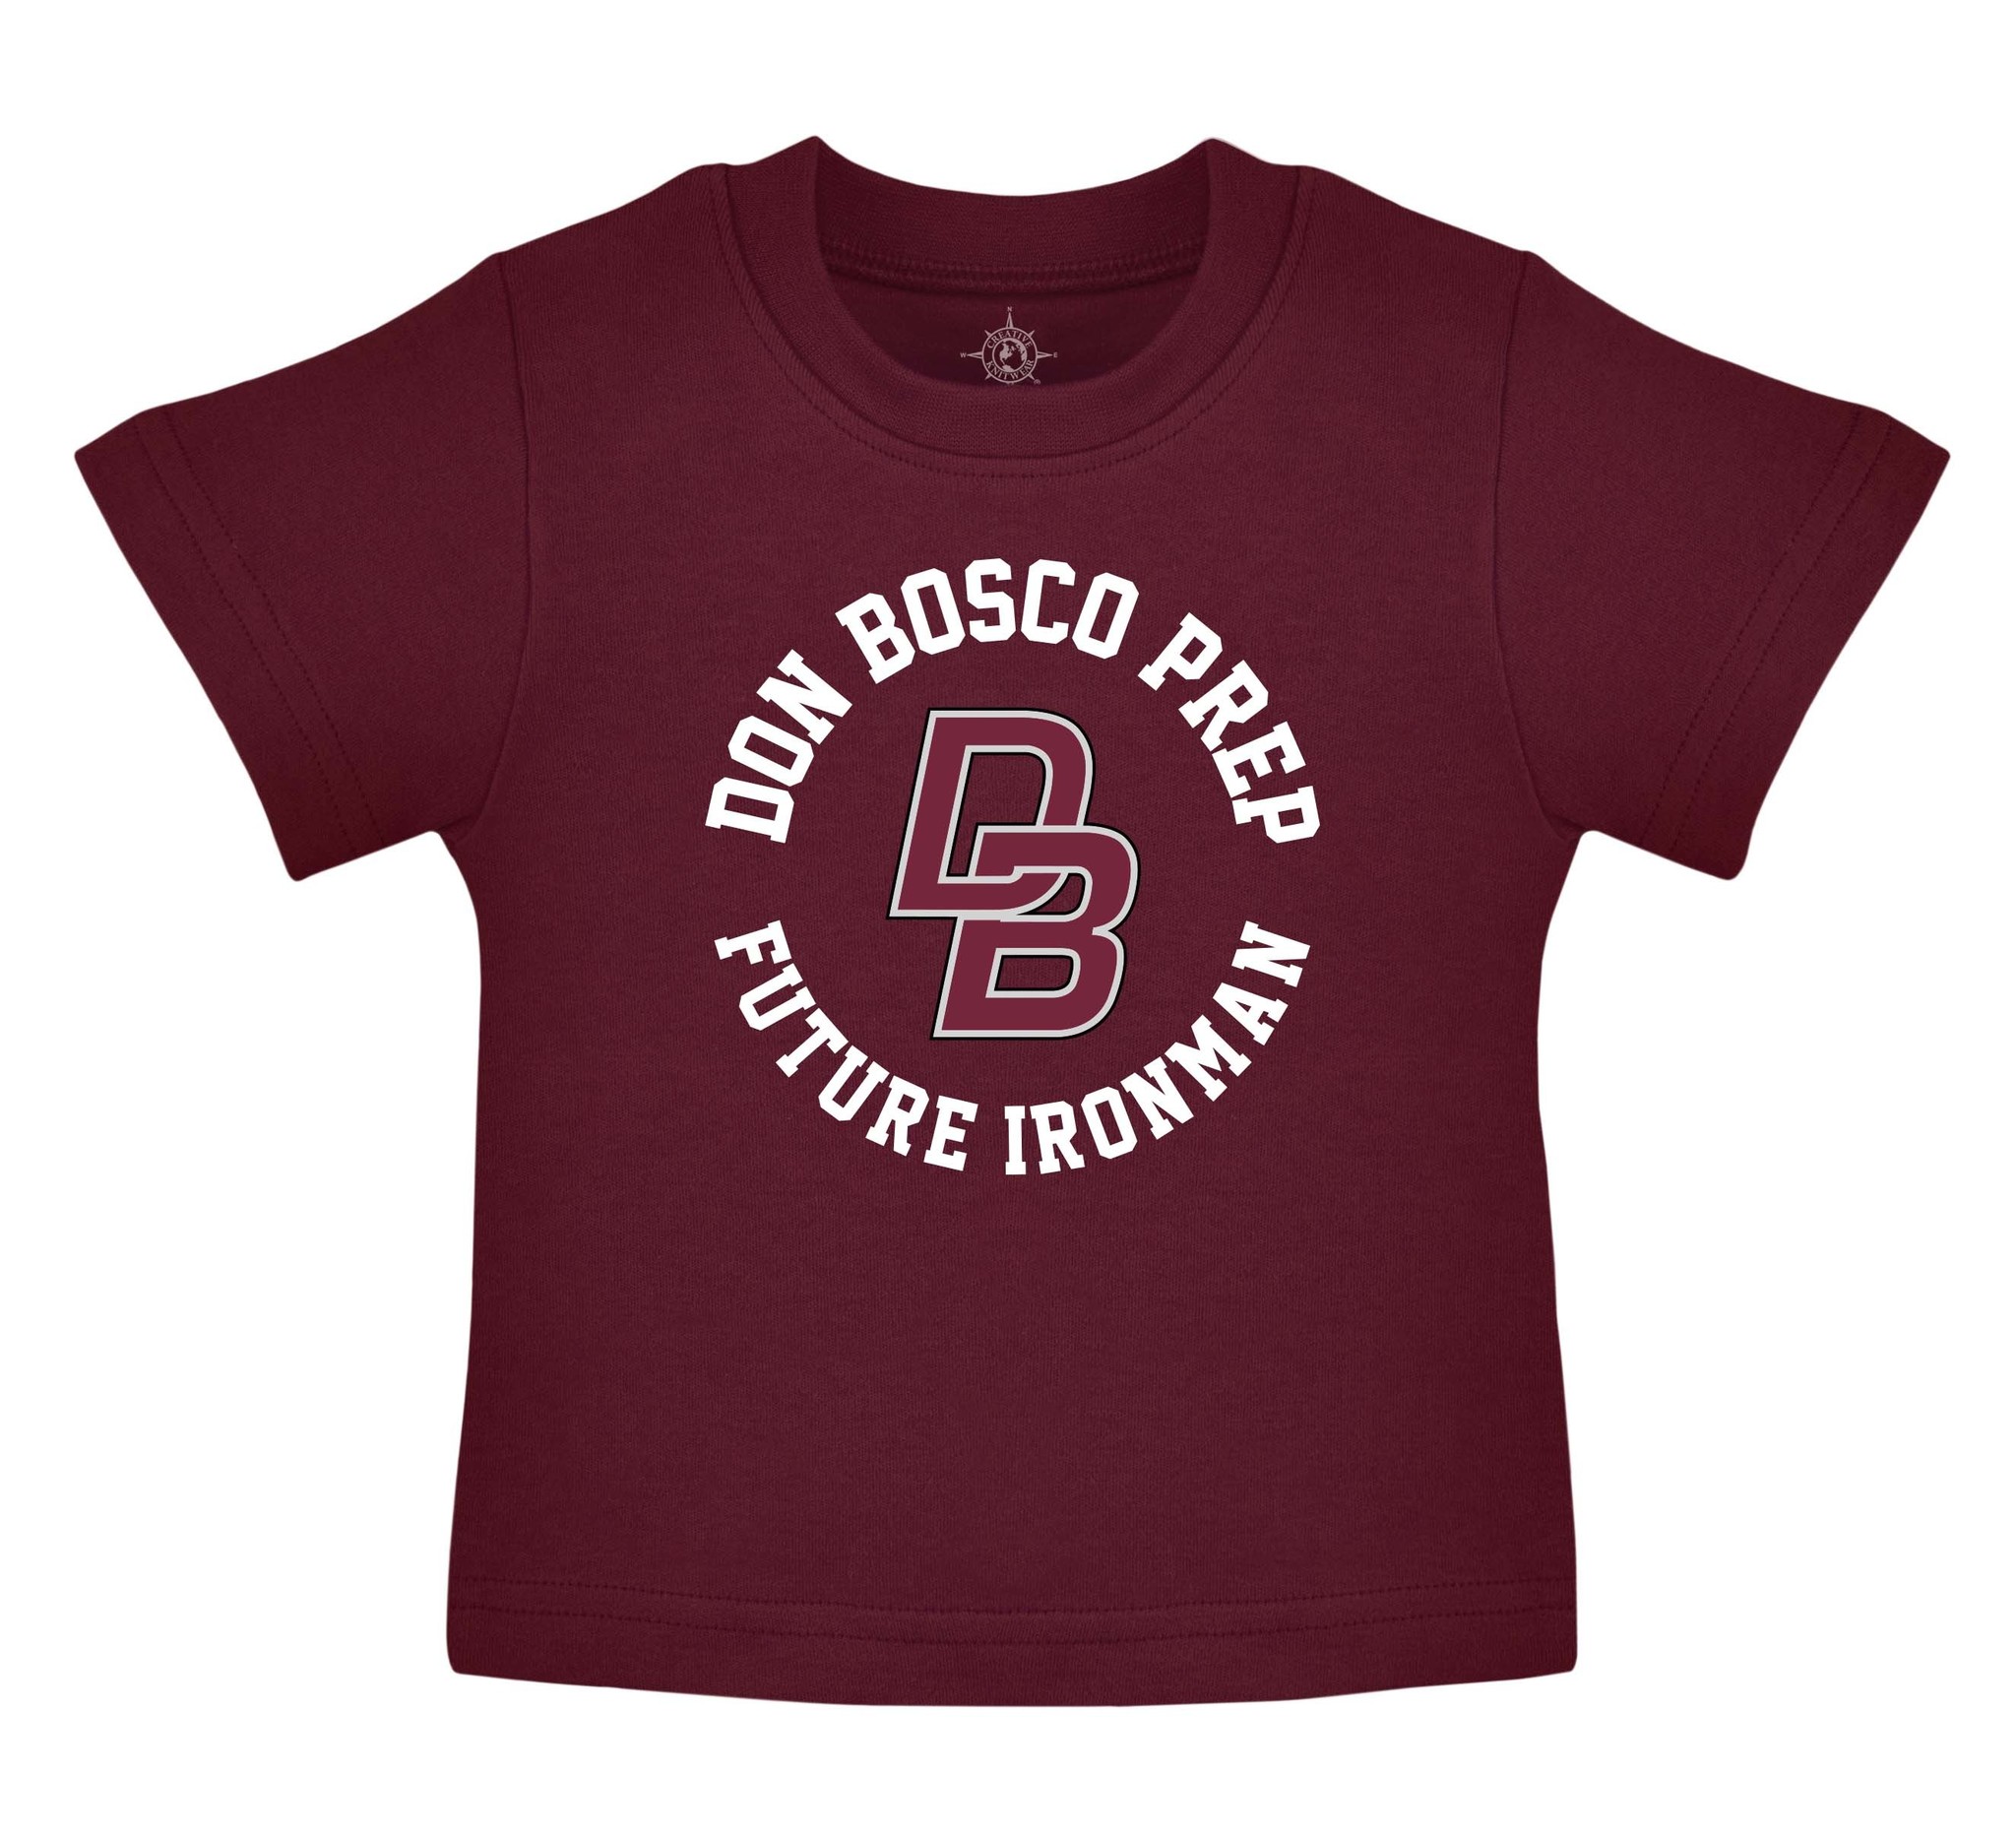 Future Ironman Youth SS T Shirt - Don Bosco Prep Campus Store